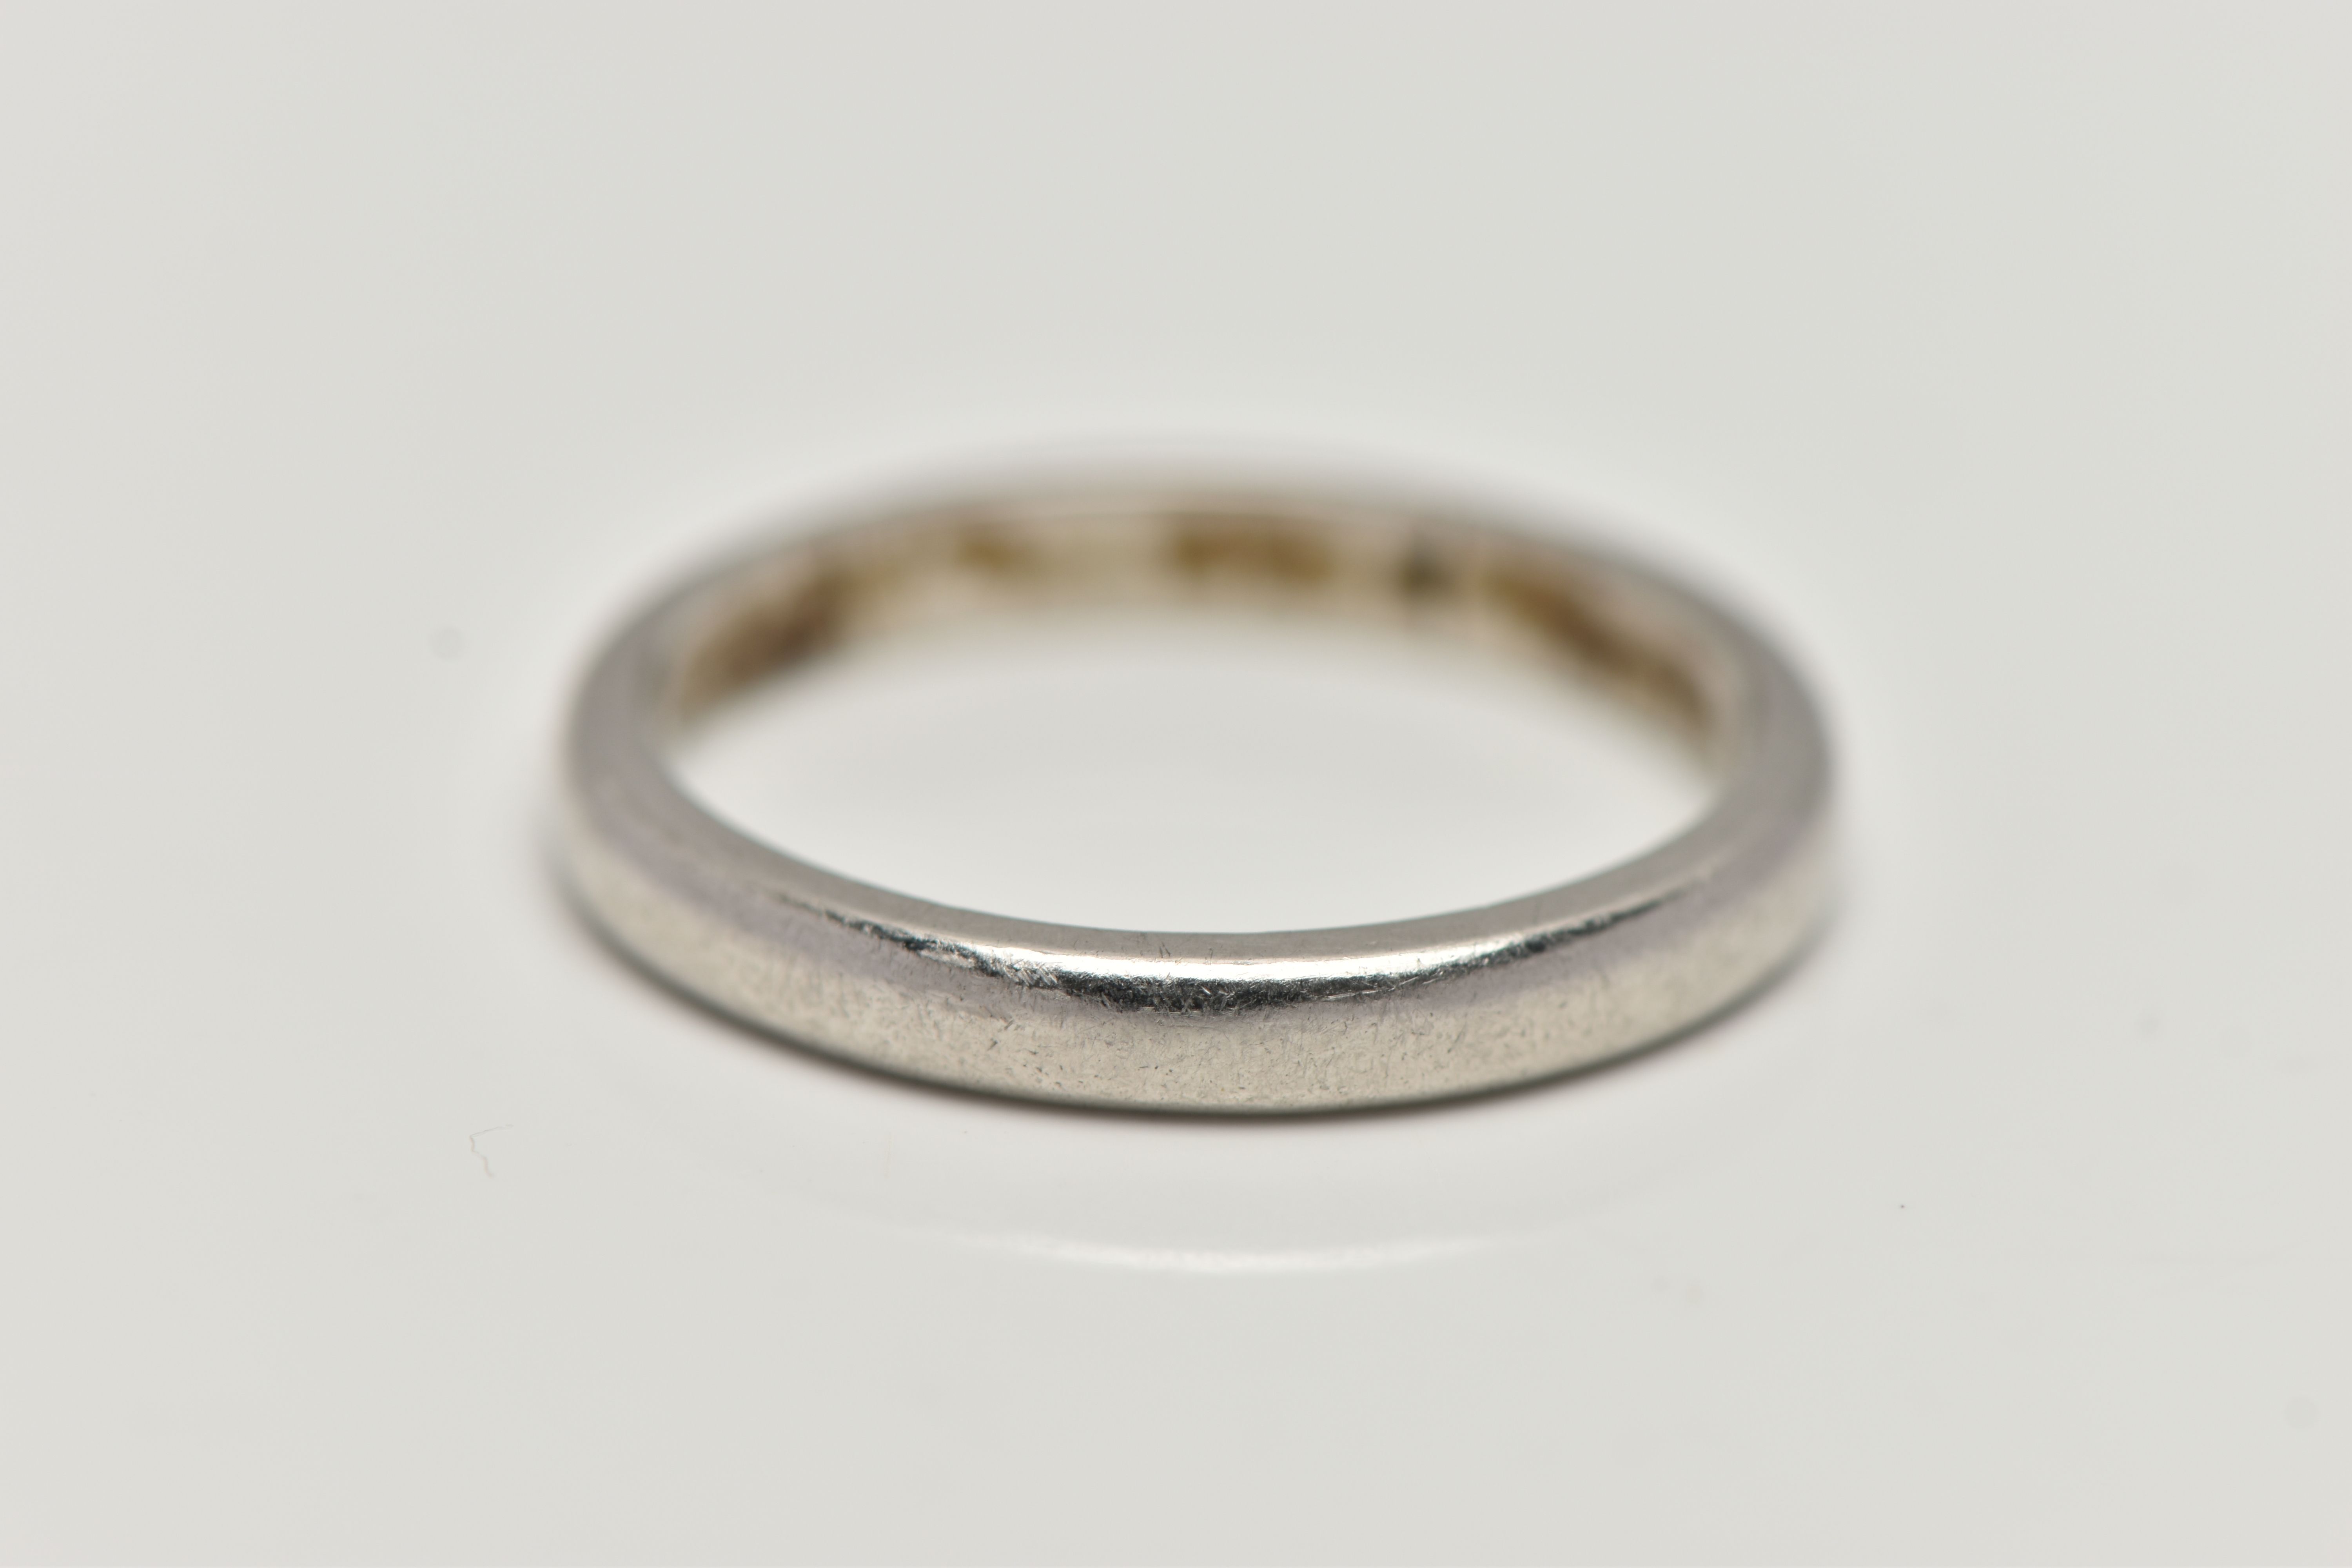 A POLISHED WHITE METAL BAND RING, unmarked band, ring size K, approximate gross weight 3.9 grams ( - Image 2 of 2